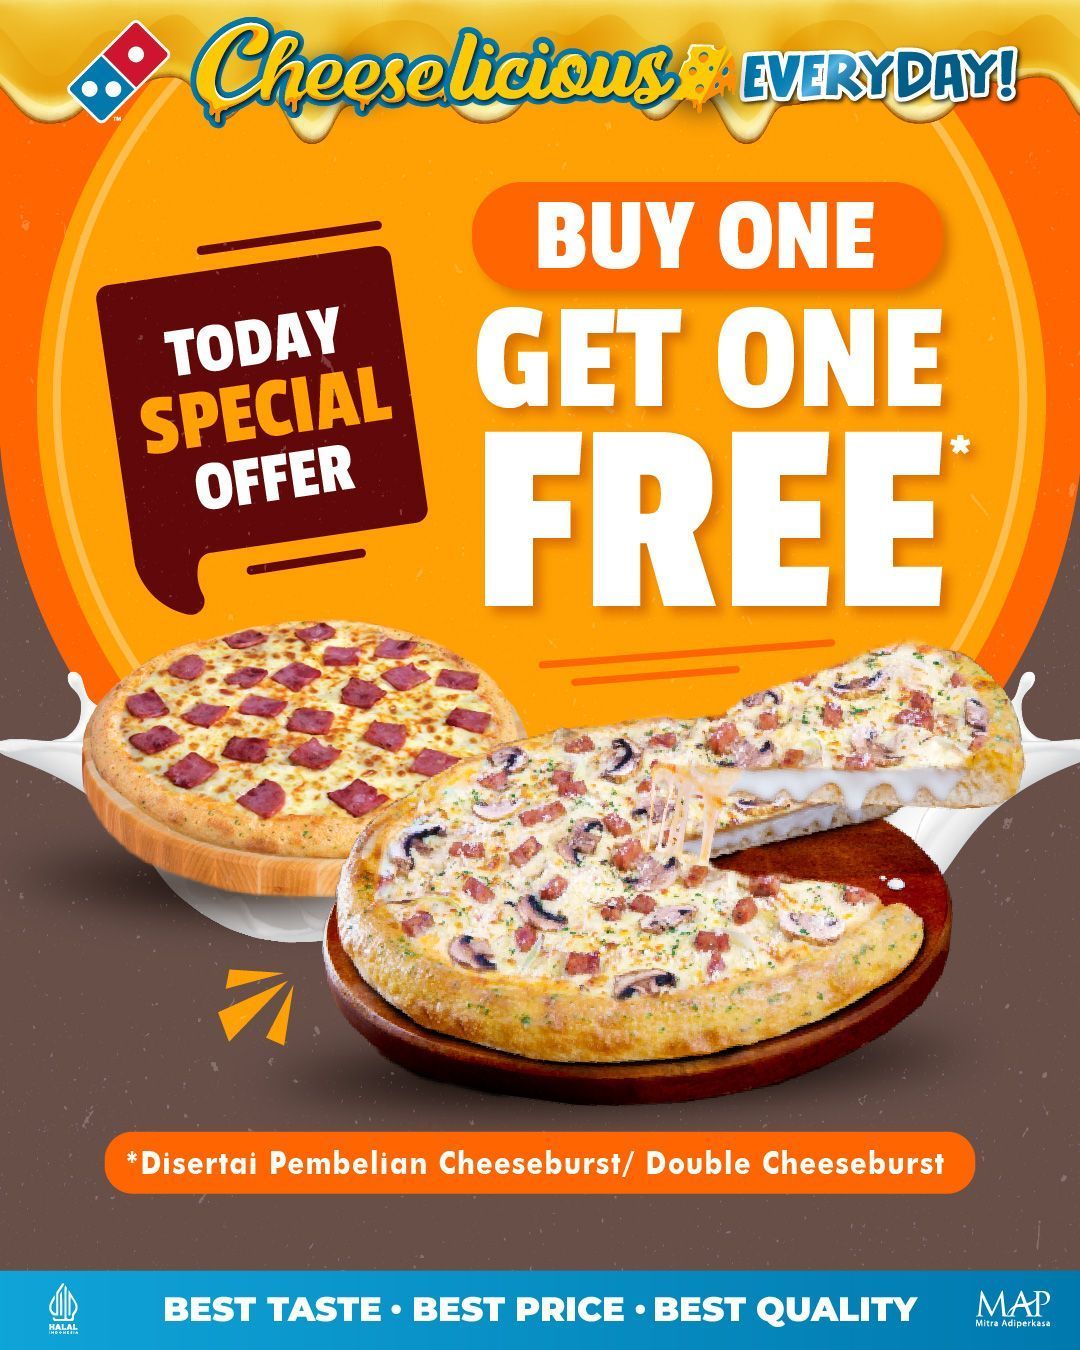 DOMINO’S PIZZA Promo Buy 1 Get 1 Free – Today Special Offer